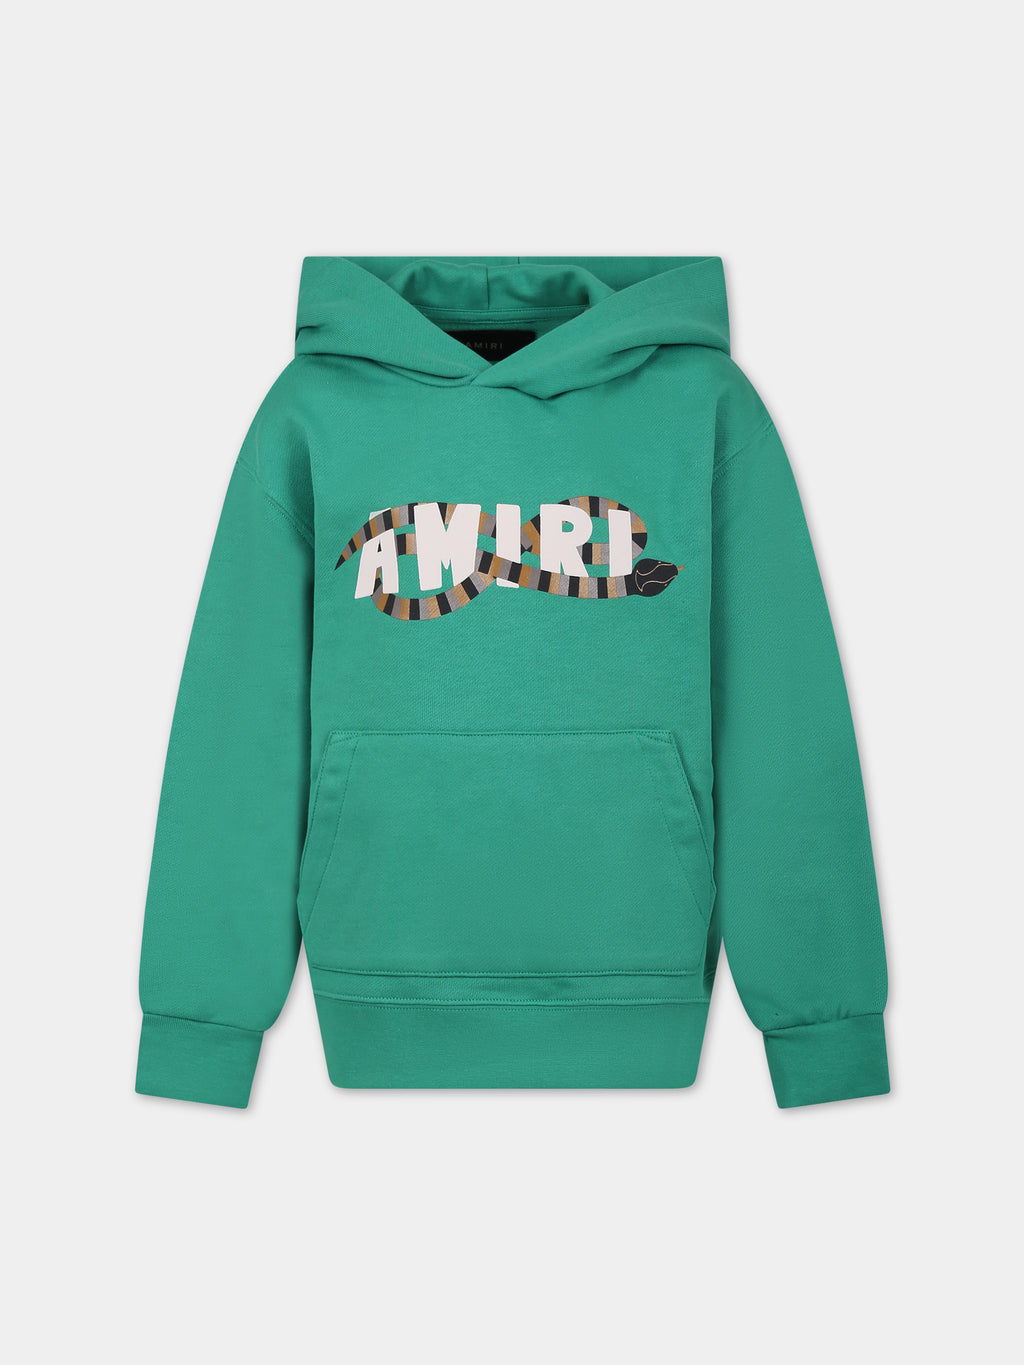 Green sweatshirt for kids with snake and logo